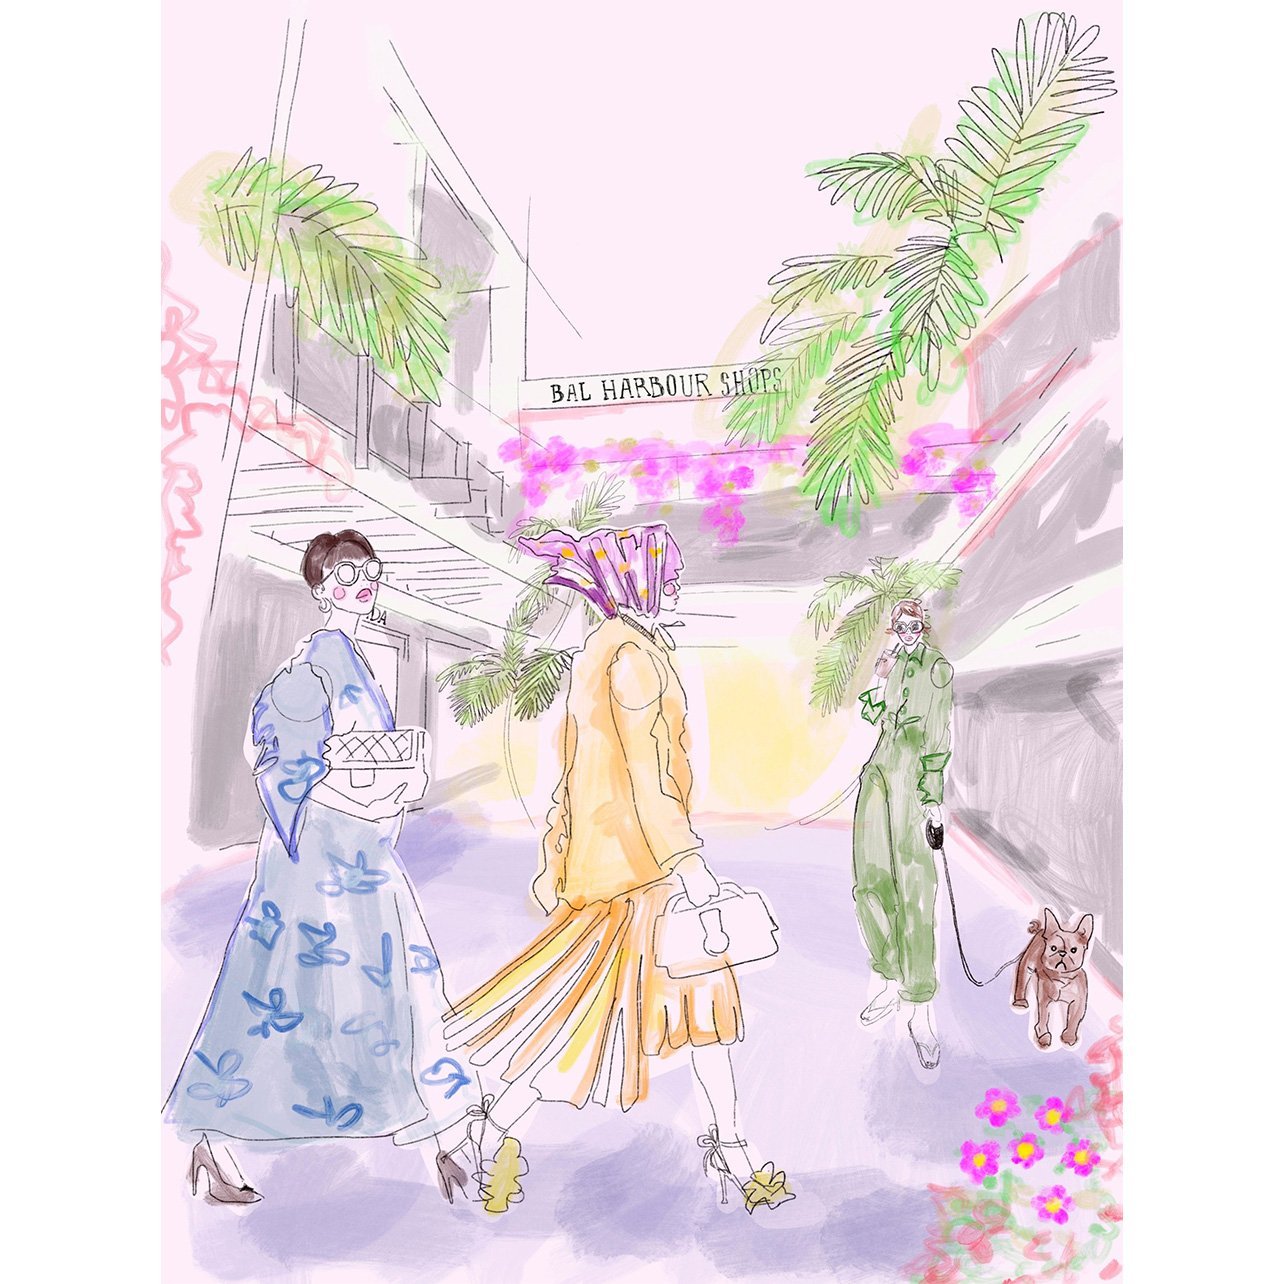 Illustration of women walking through bal harbour shops by lily ghodsi